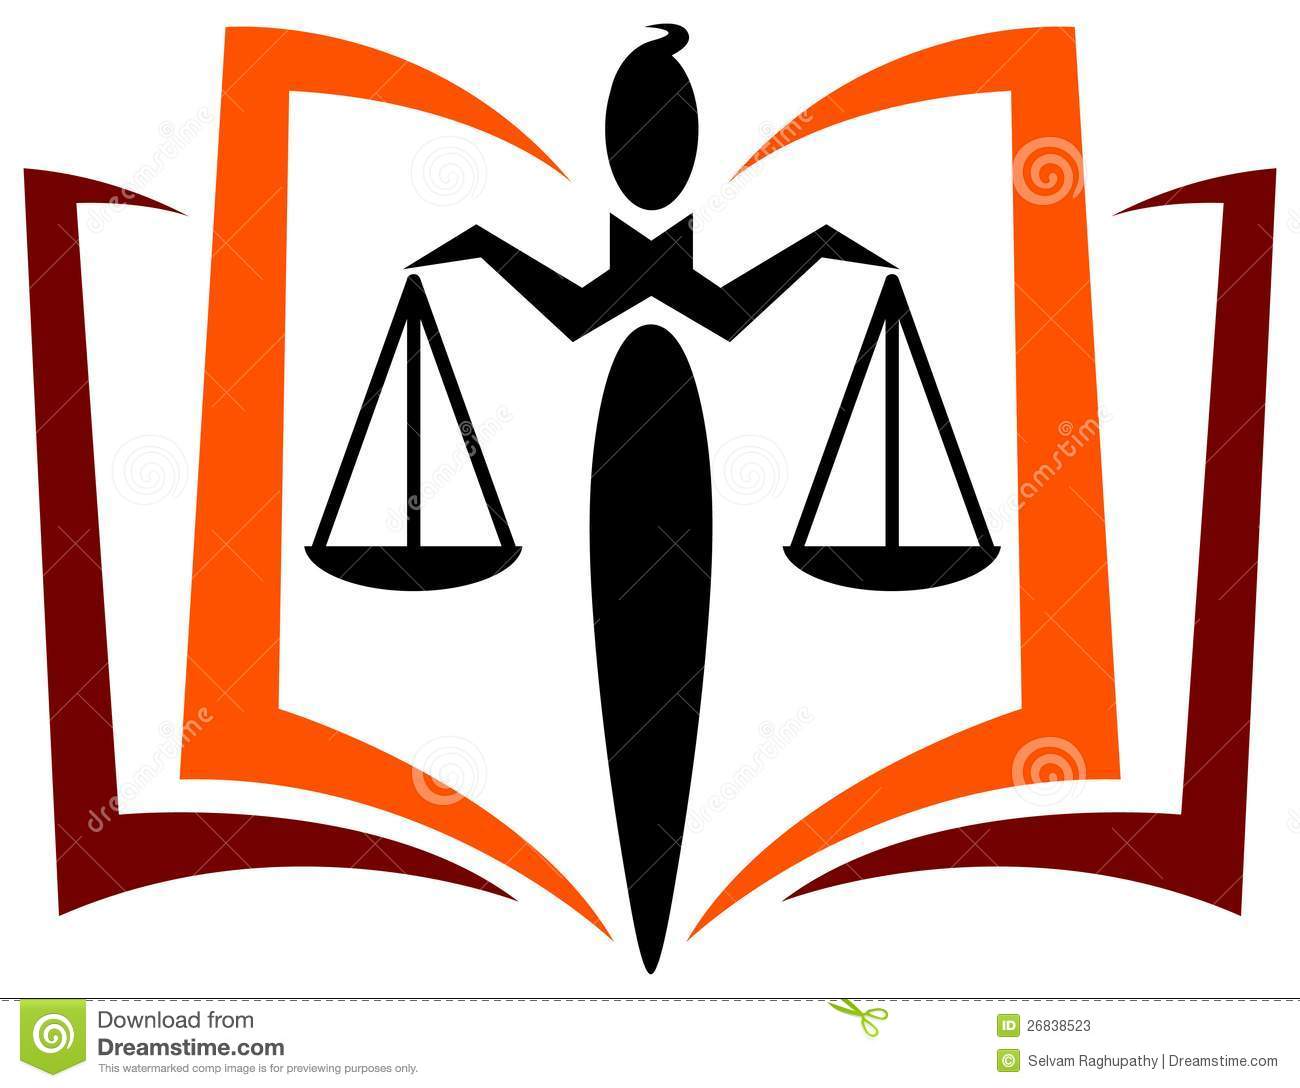 Legal clipart district attorney. Lawyer free download best